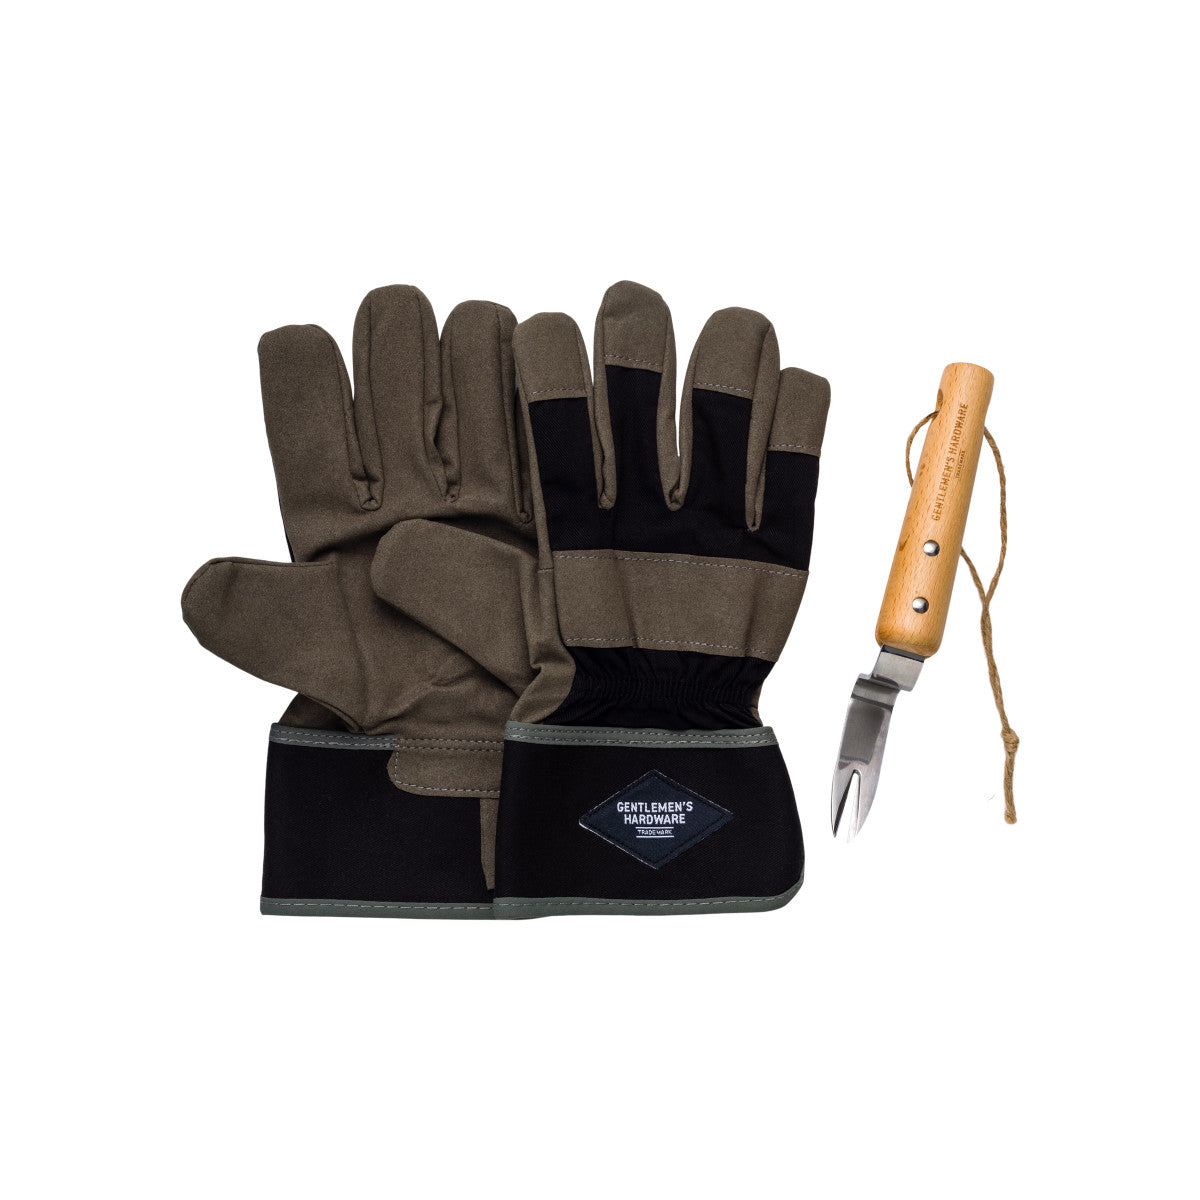 Leather Gloves and Root Lifter - Elegant Gardening Essentials